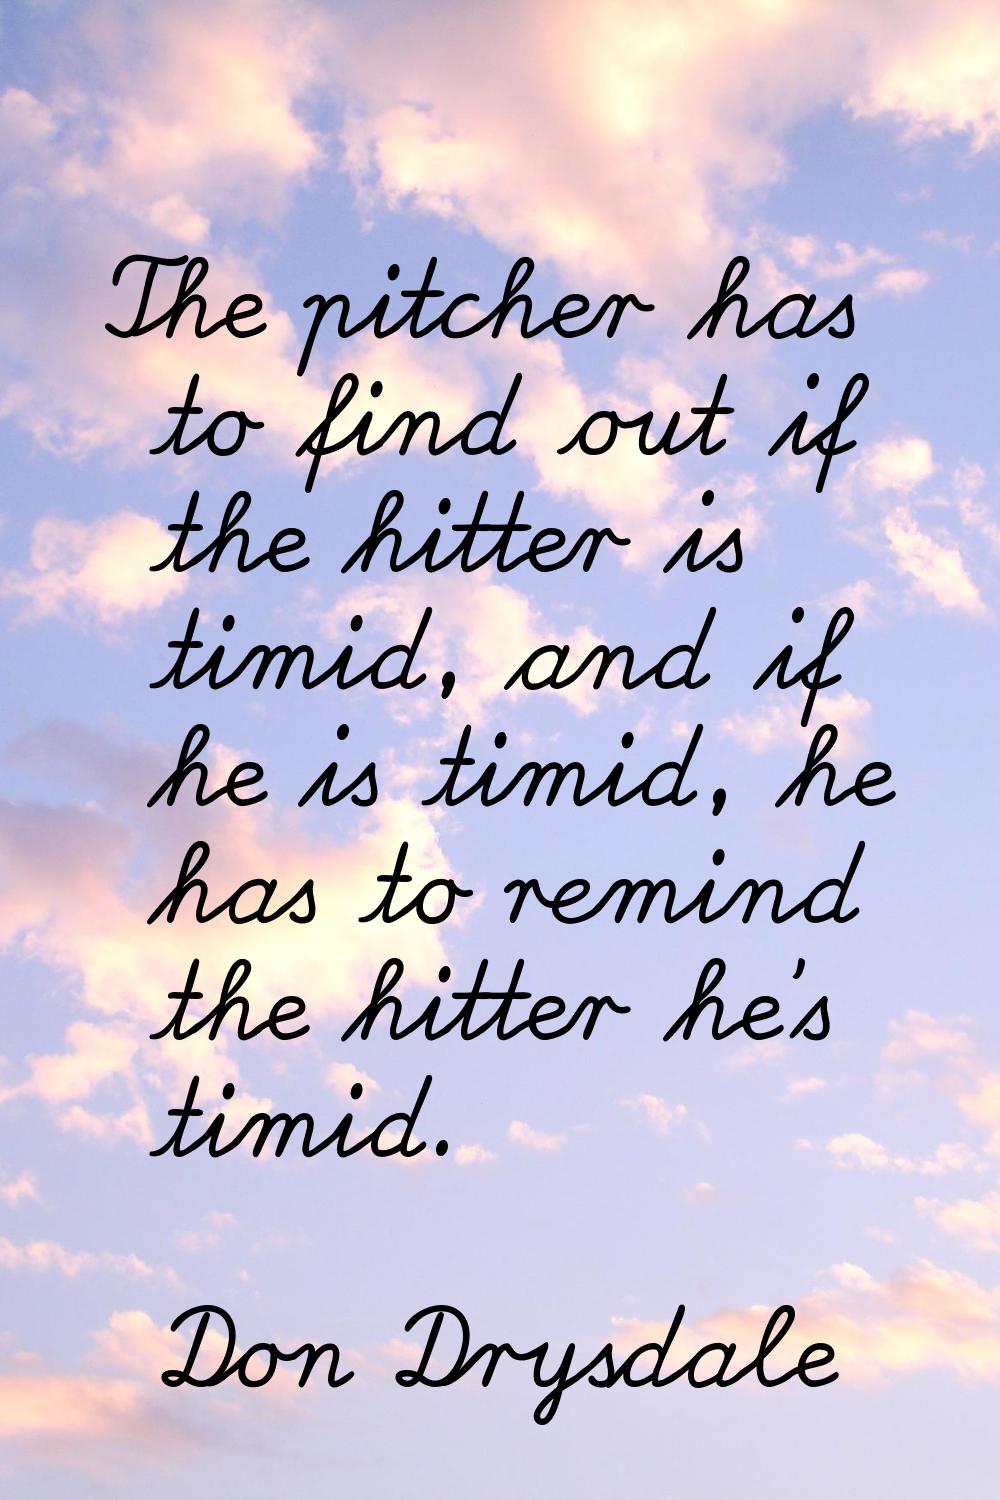 The pitcher has to find out if the hitter is timid, and if he is timid, he has to remind the hitter